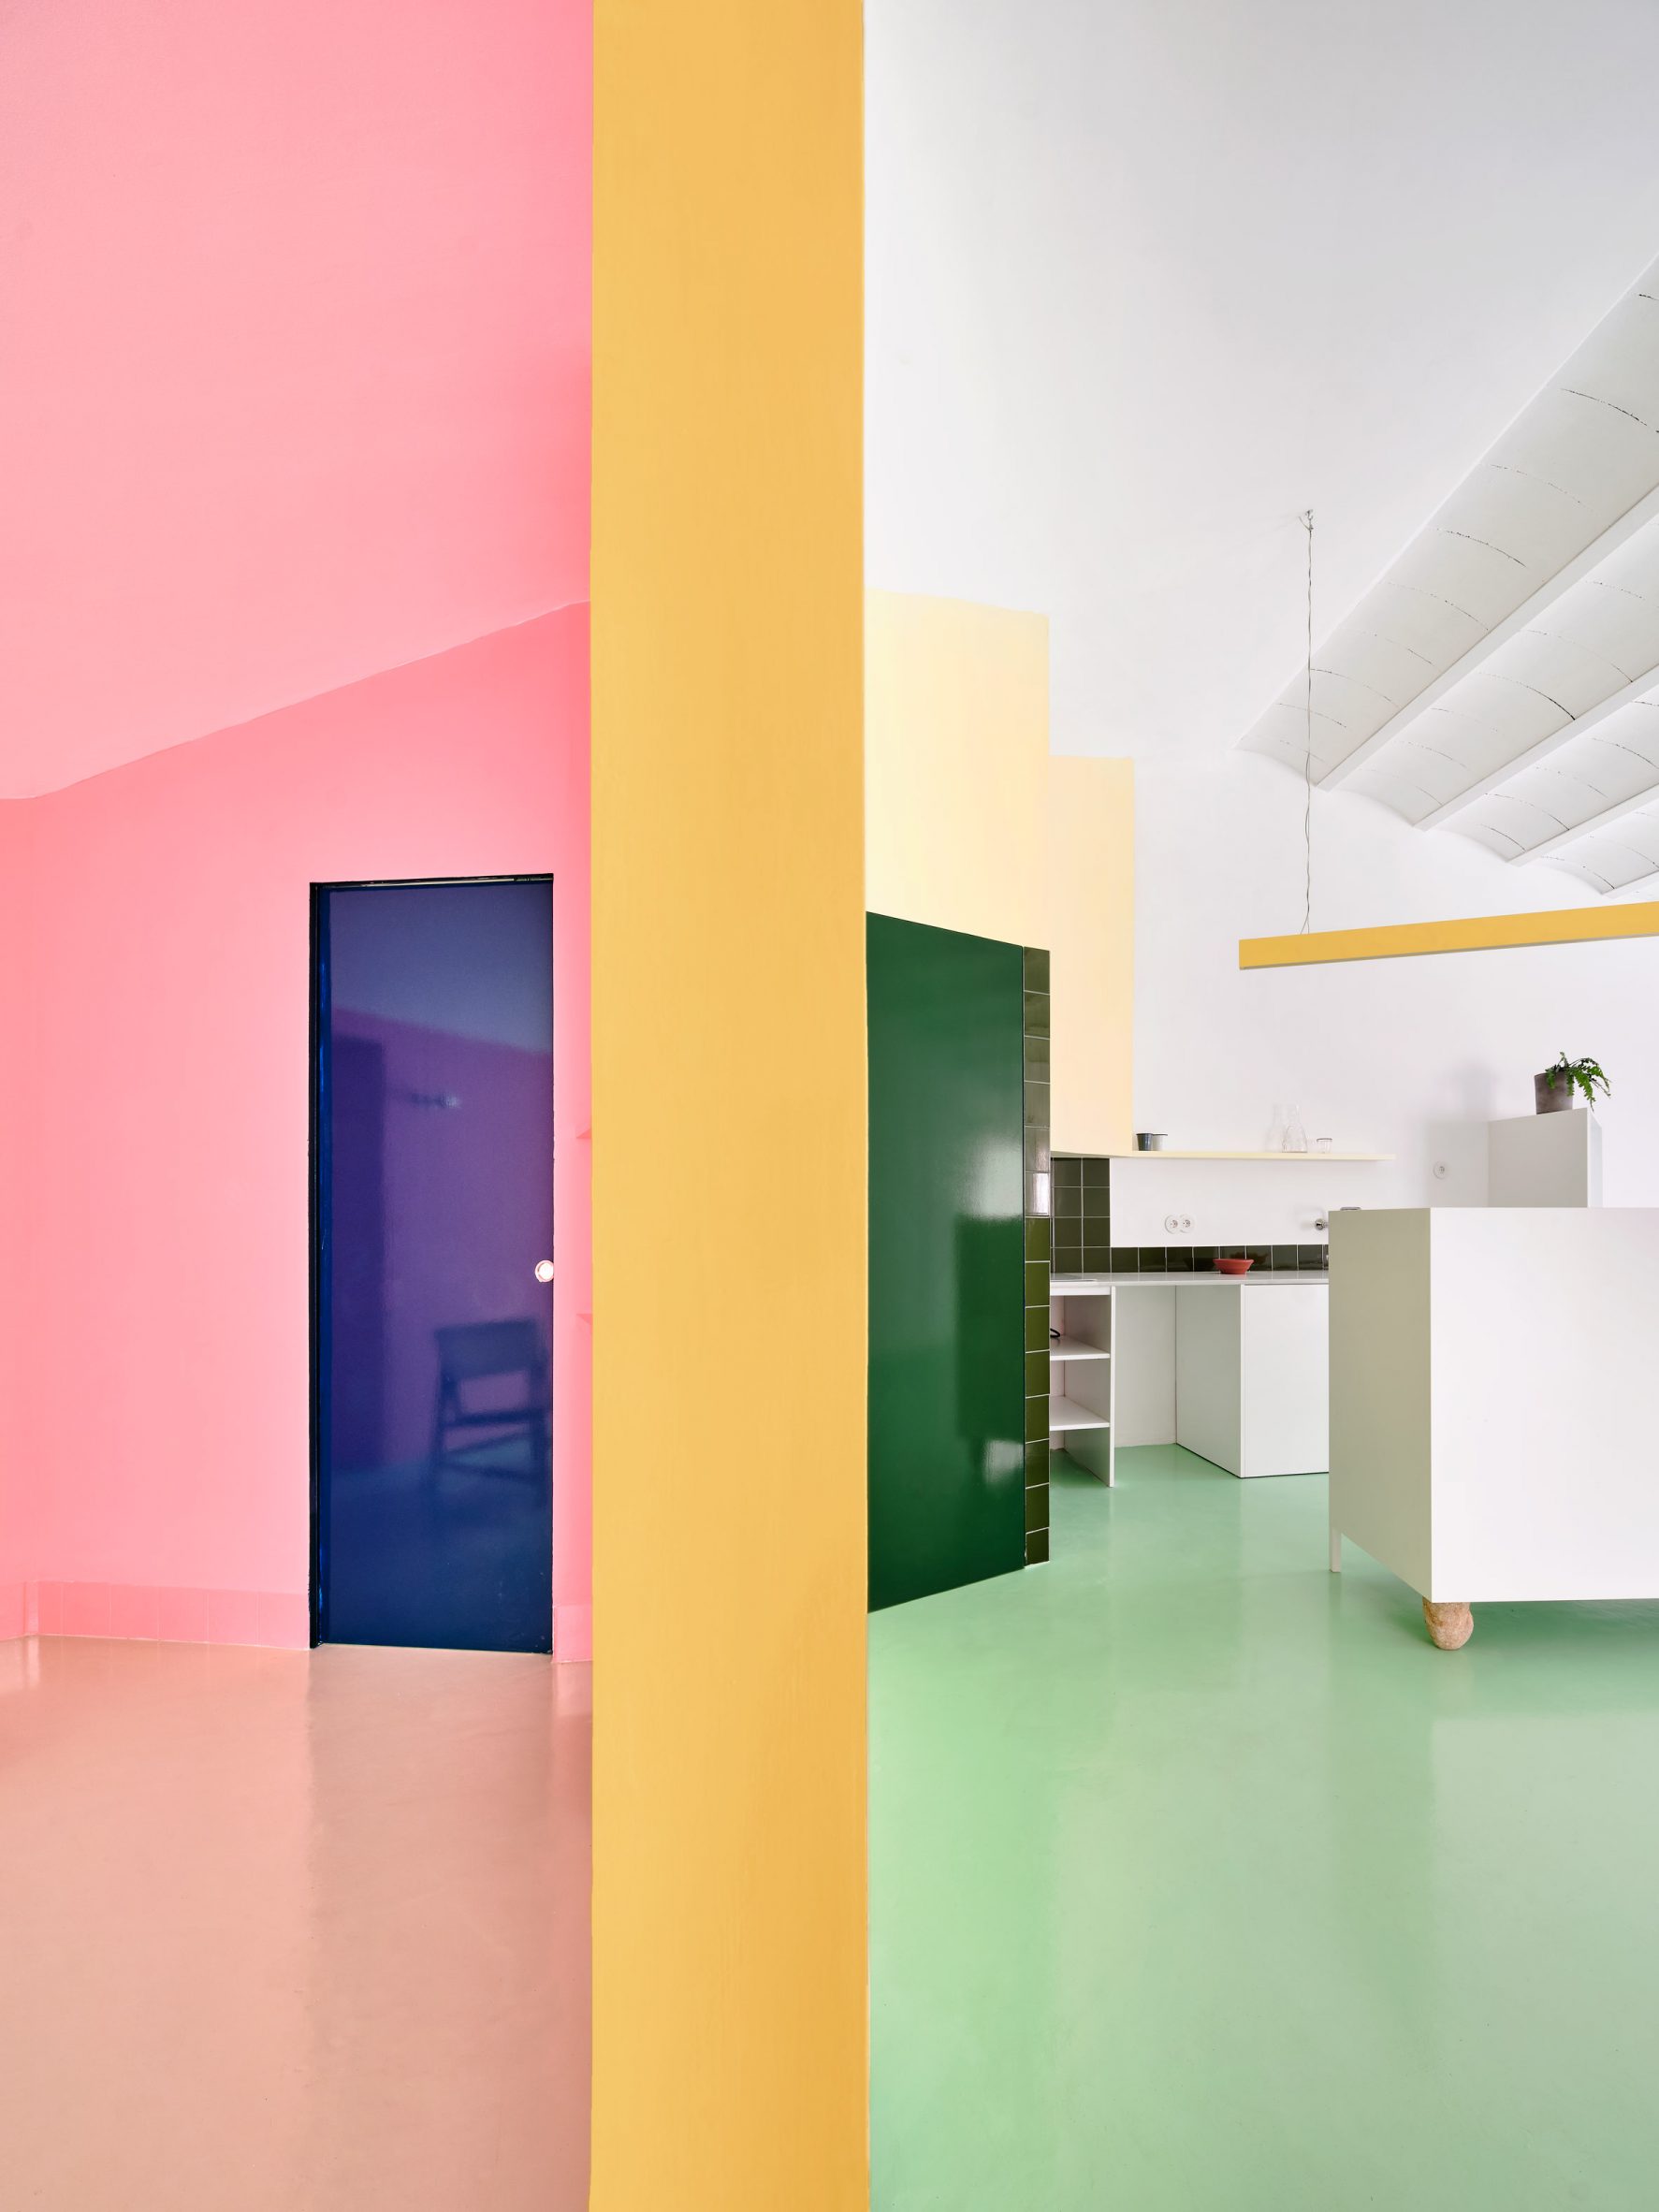 Colourful walls within Relámpago House